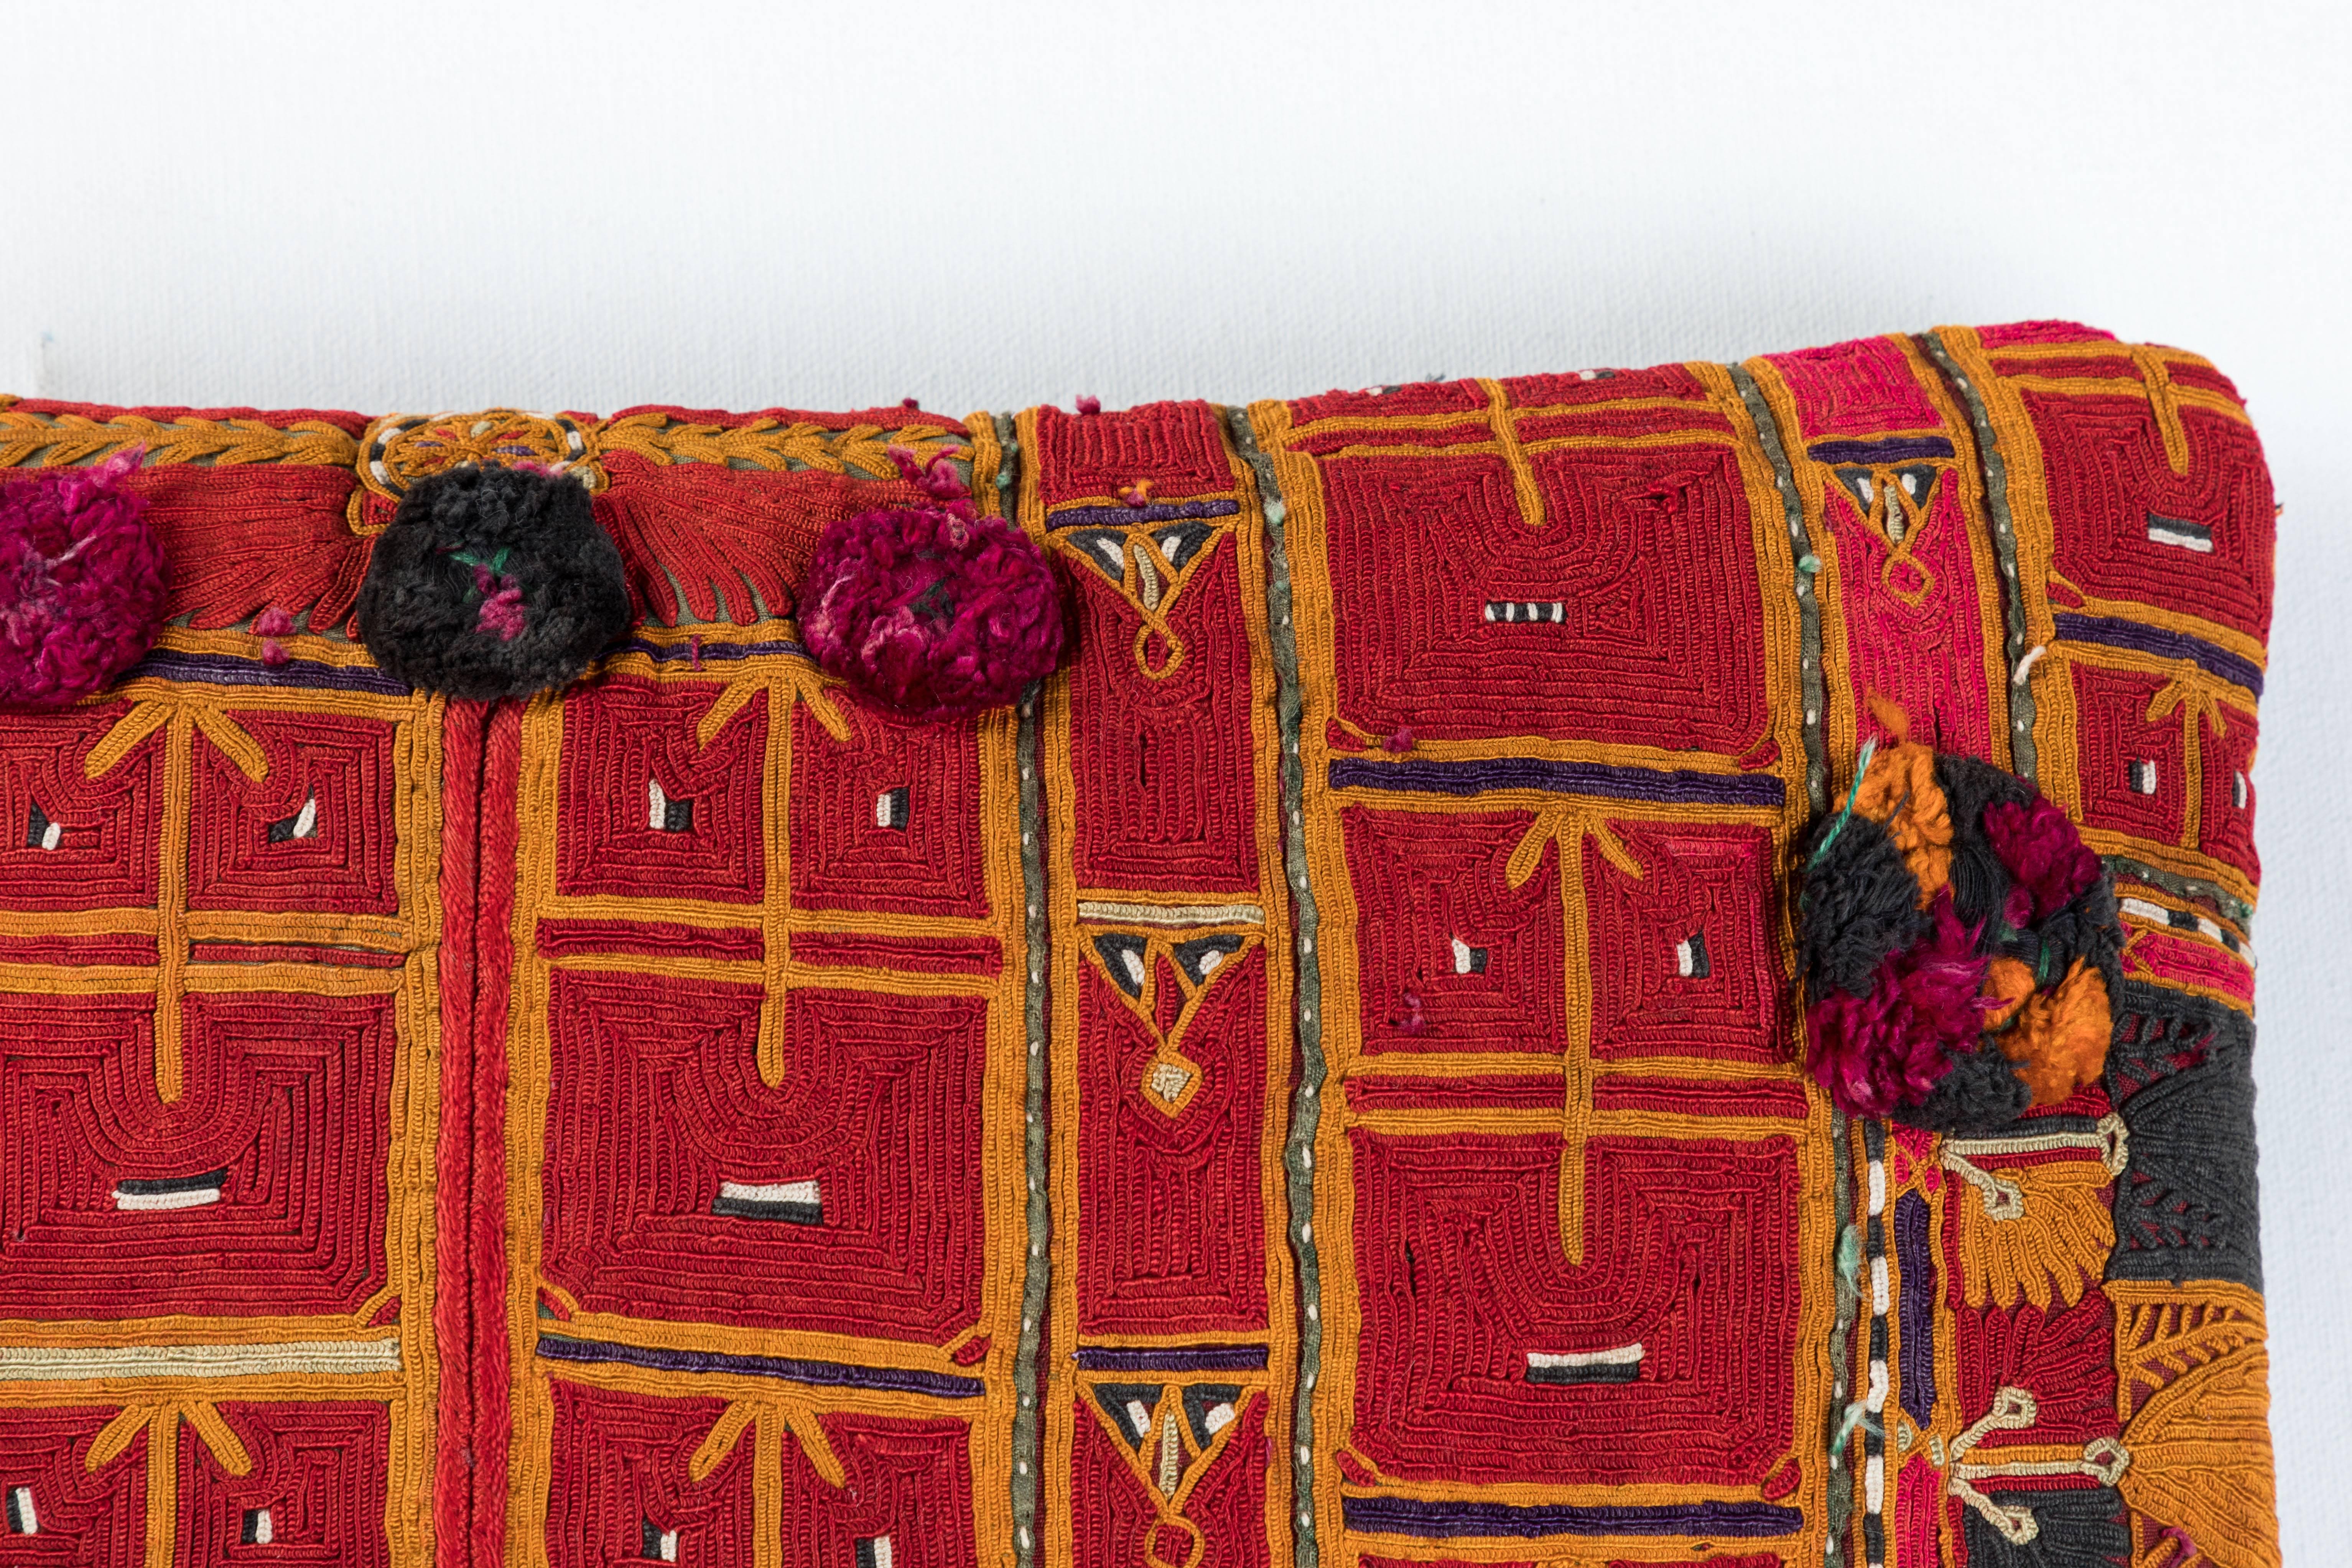 Hand-Woven Afghani Pashtun Embroidery Pillow